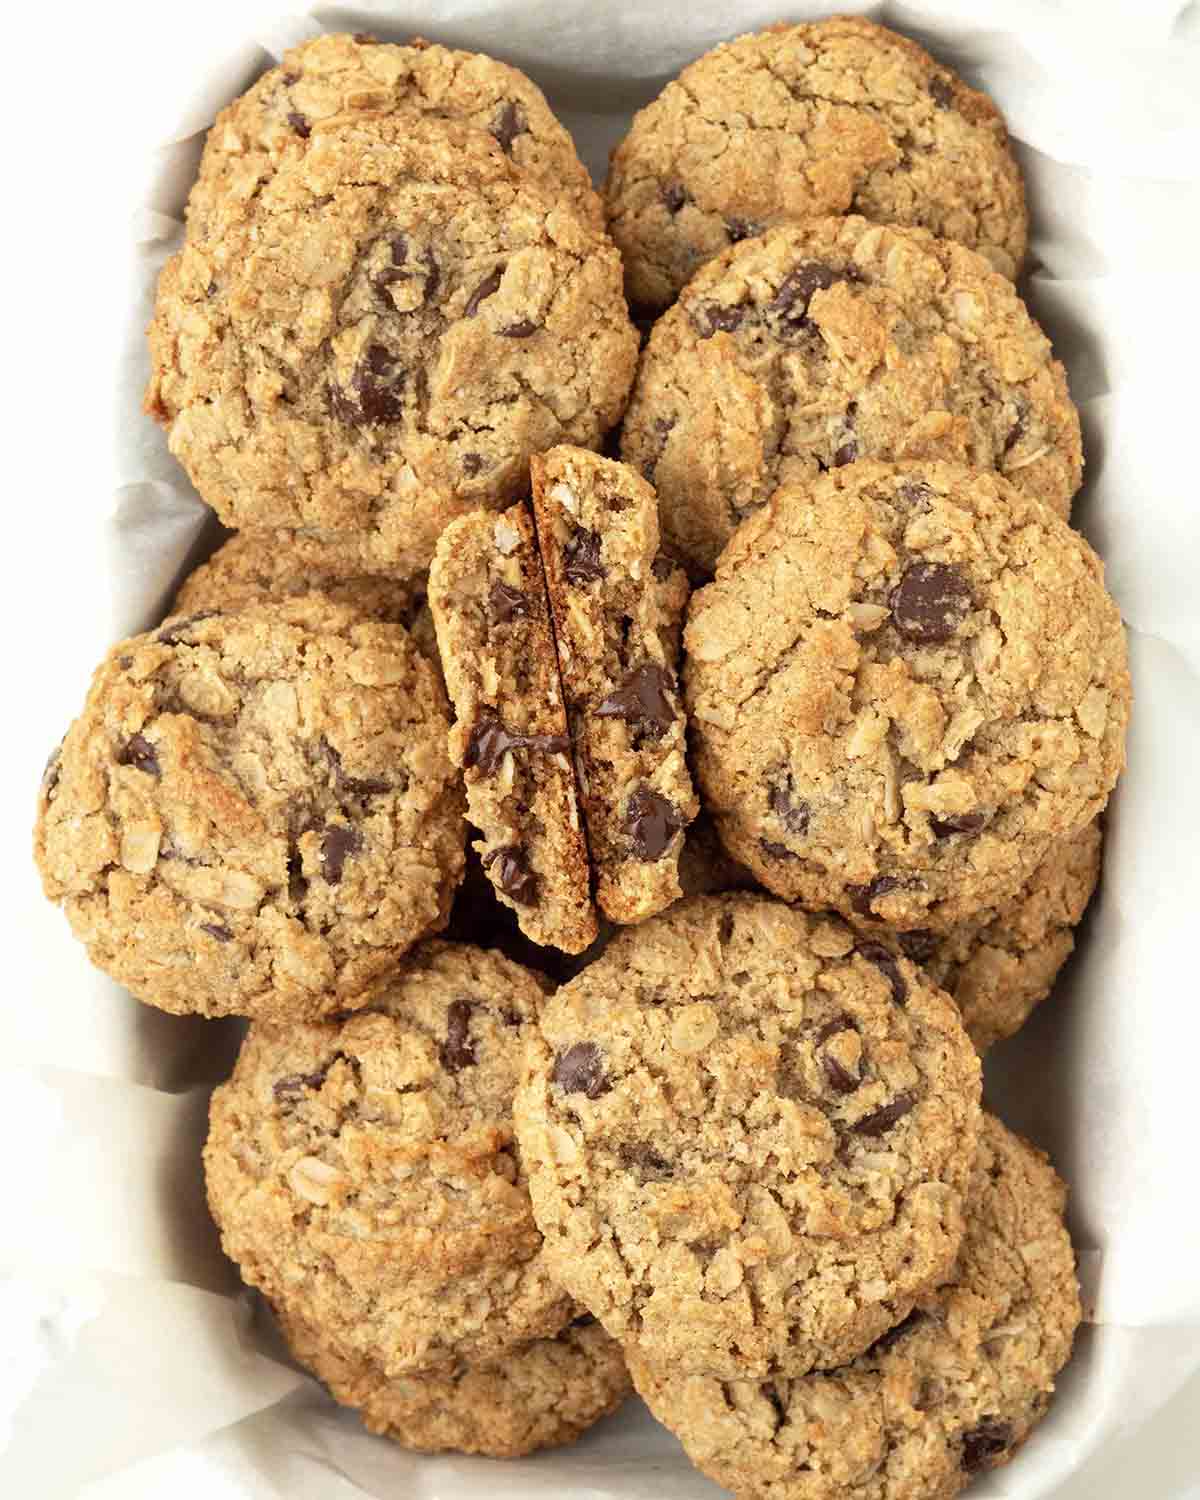 An overhead shot of vegan almond flour oatmeal cookies in a serving dish, one cookie is split in half to show the inside.